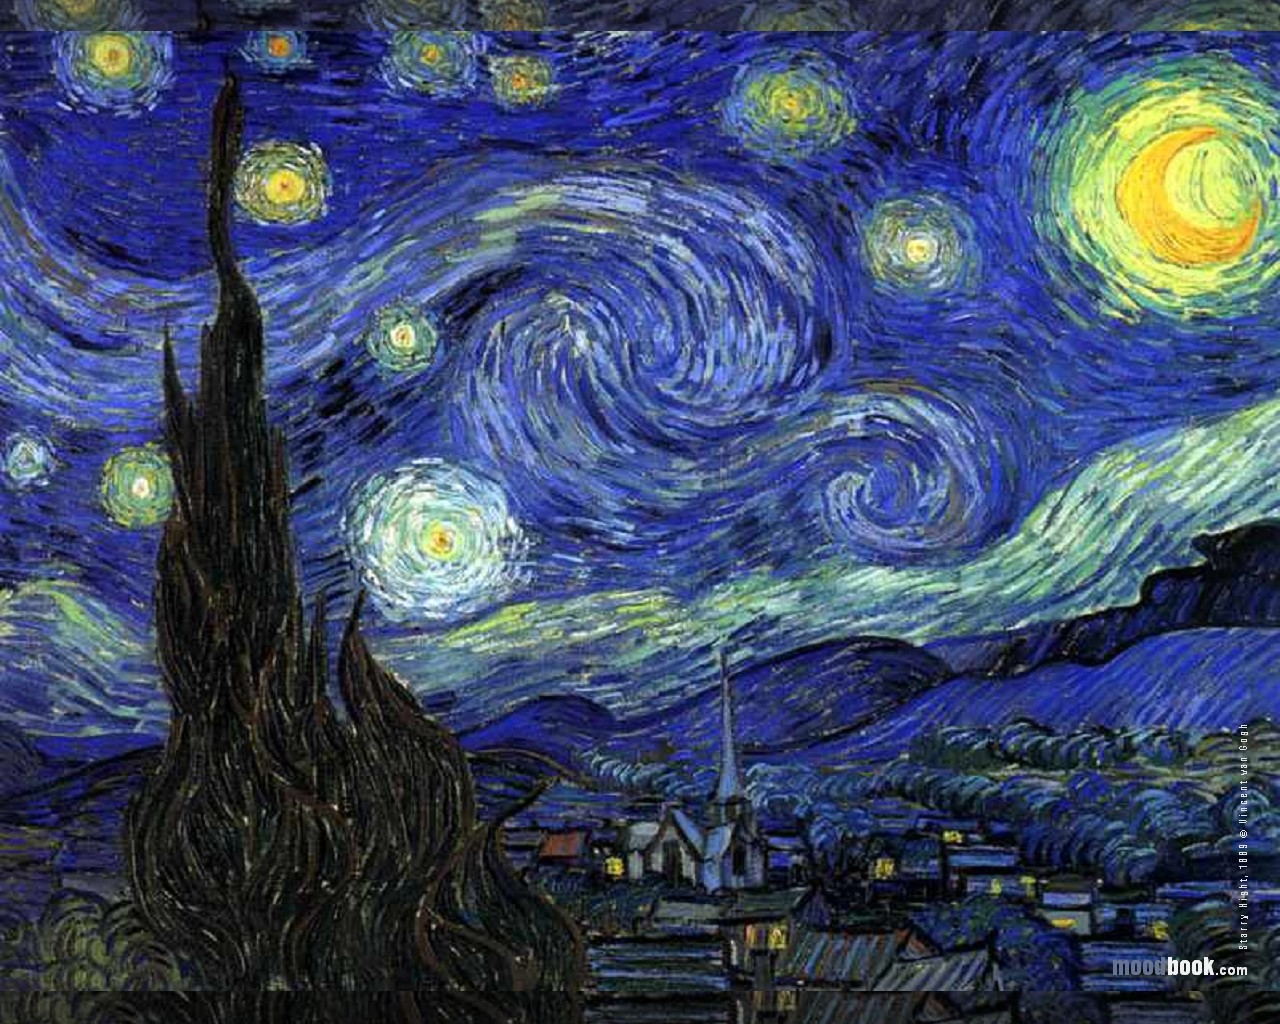 Any given day : The Starry Night by Vincent van Gogh